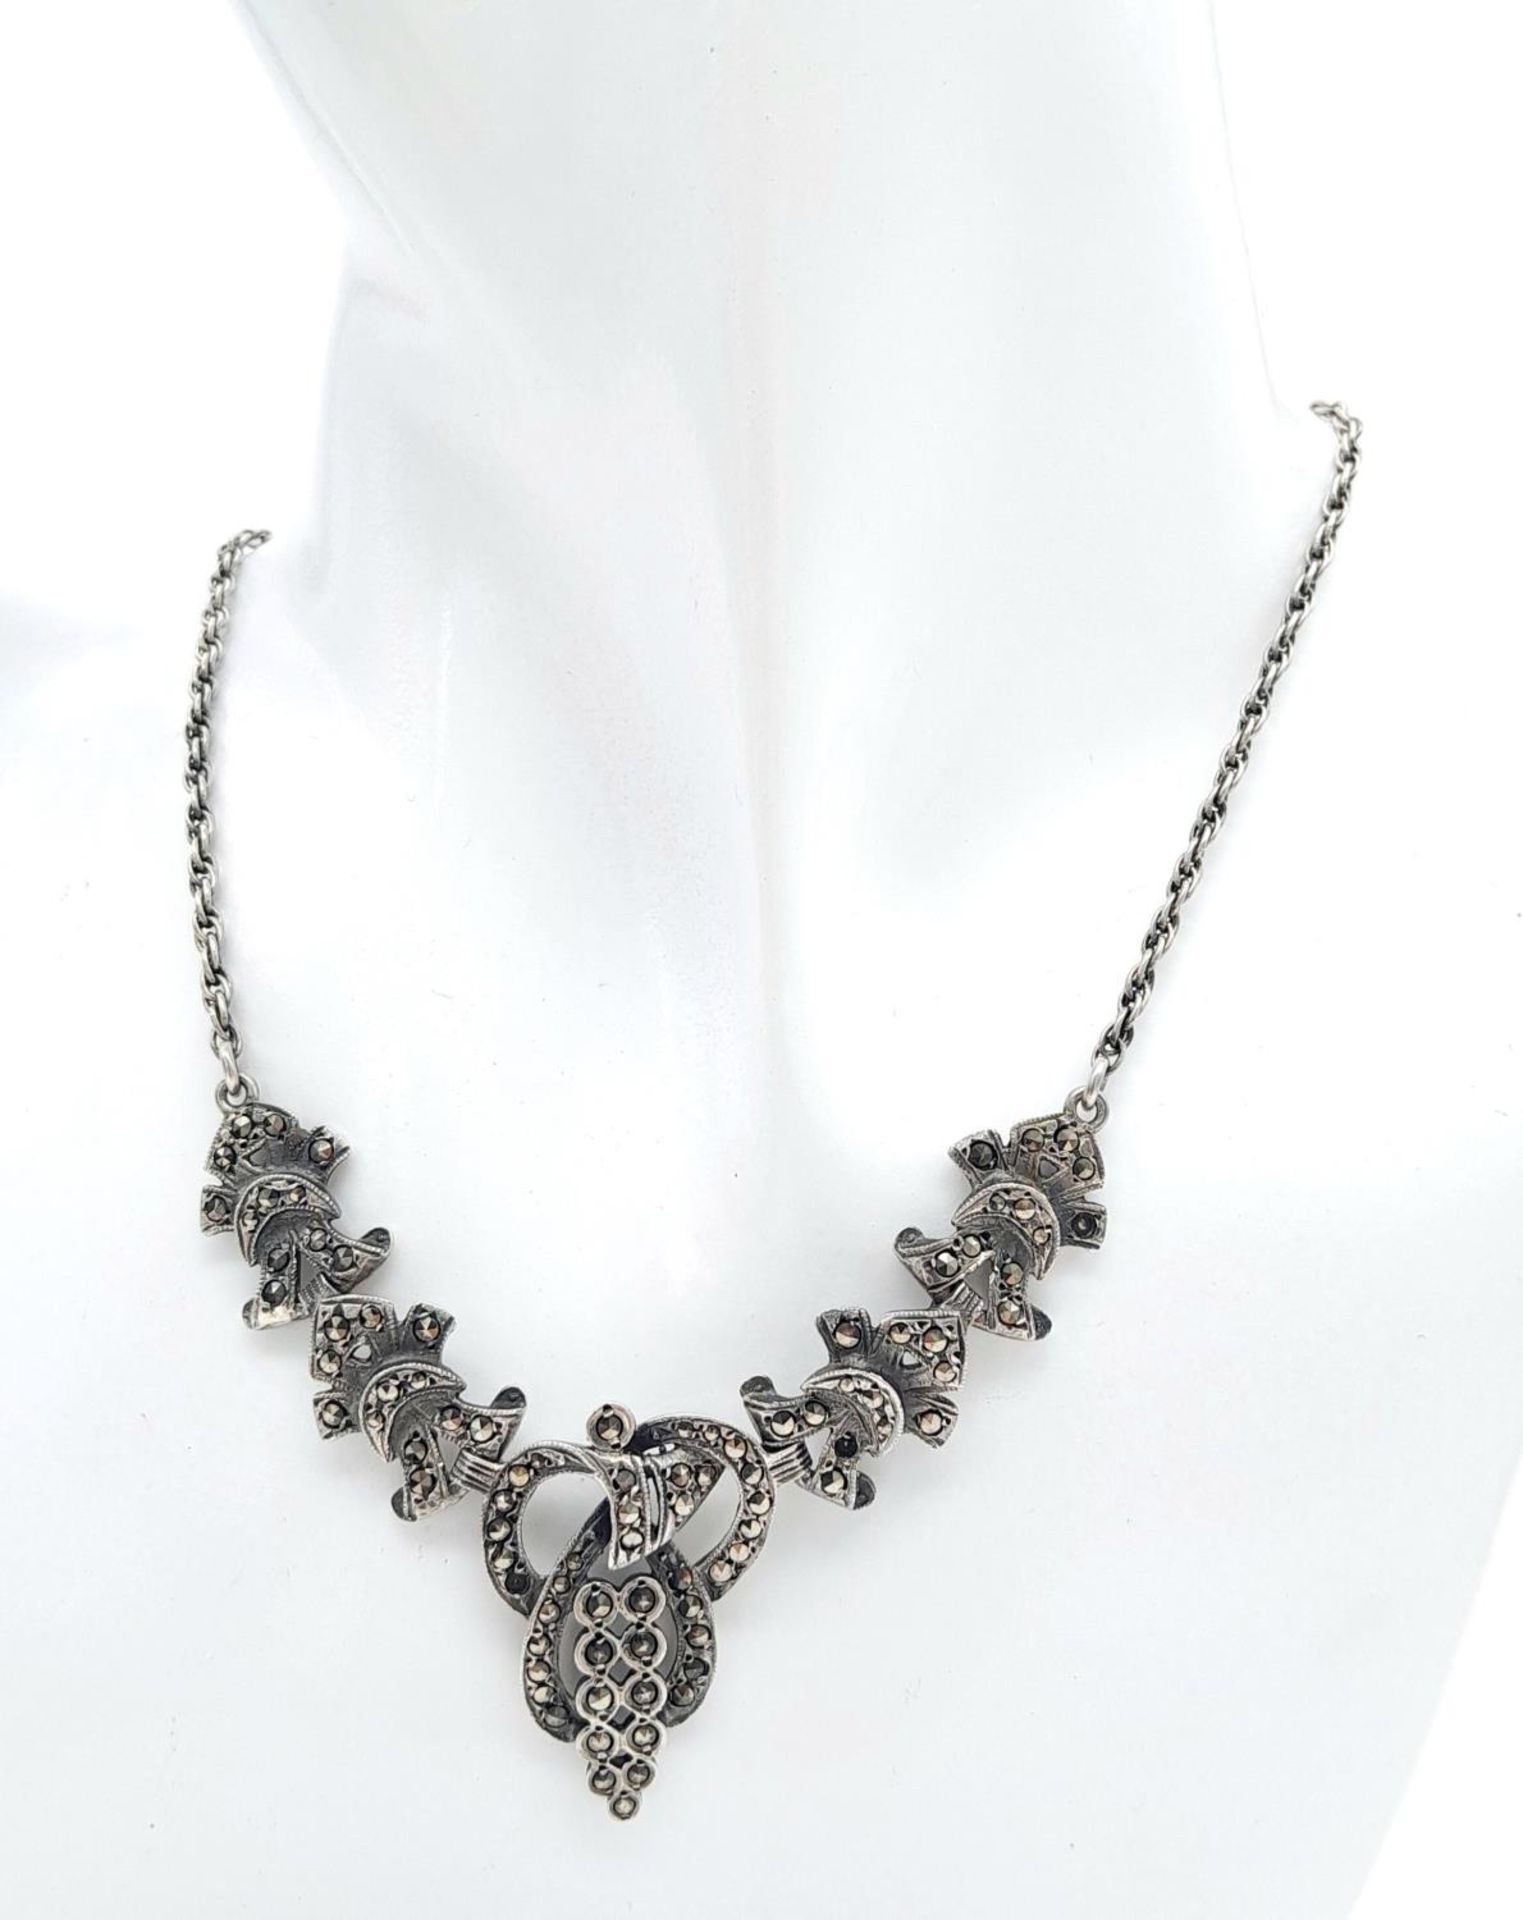 A Vintage Silver Marcasite Necklace. 43cm length, 18.92g total weight. - Image 2 of 5